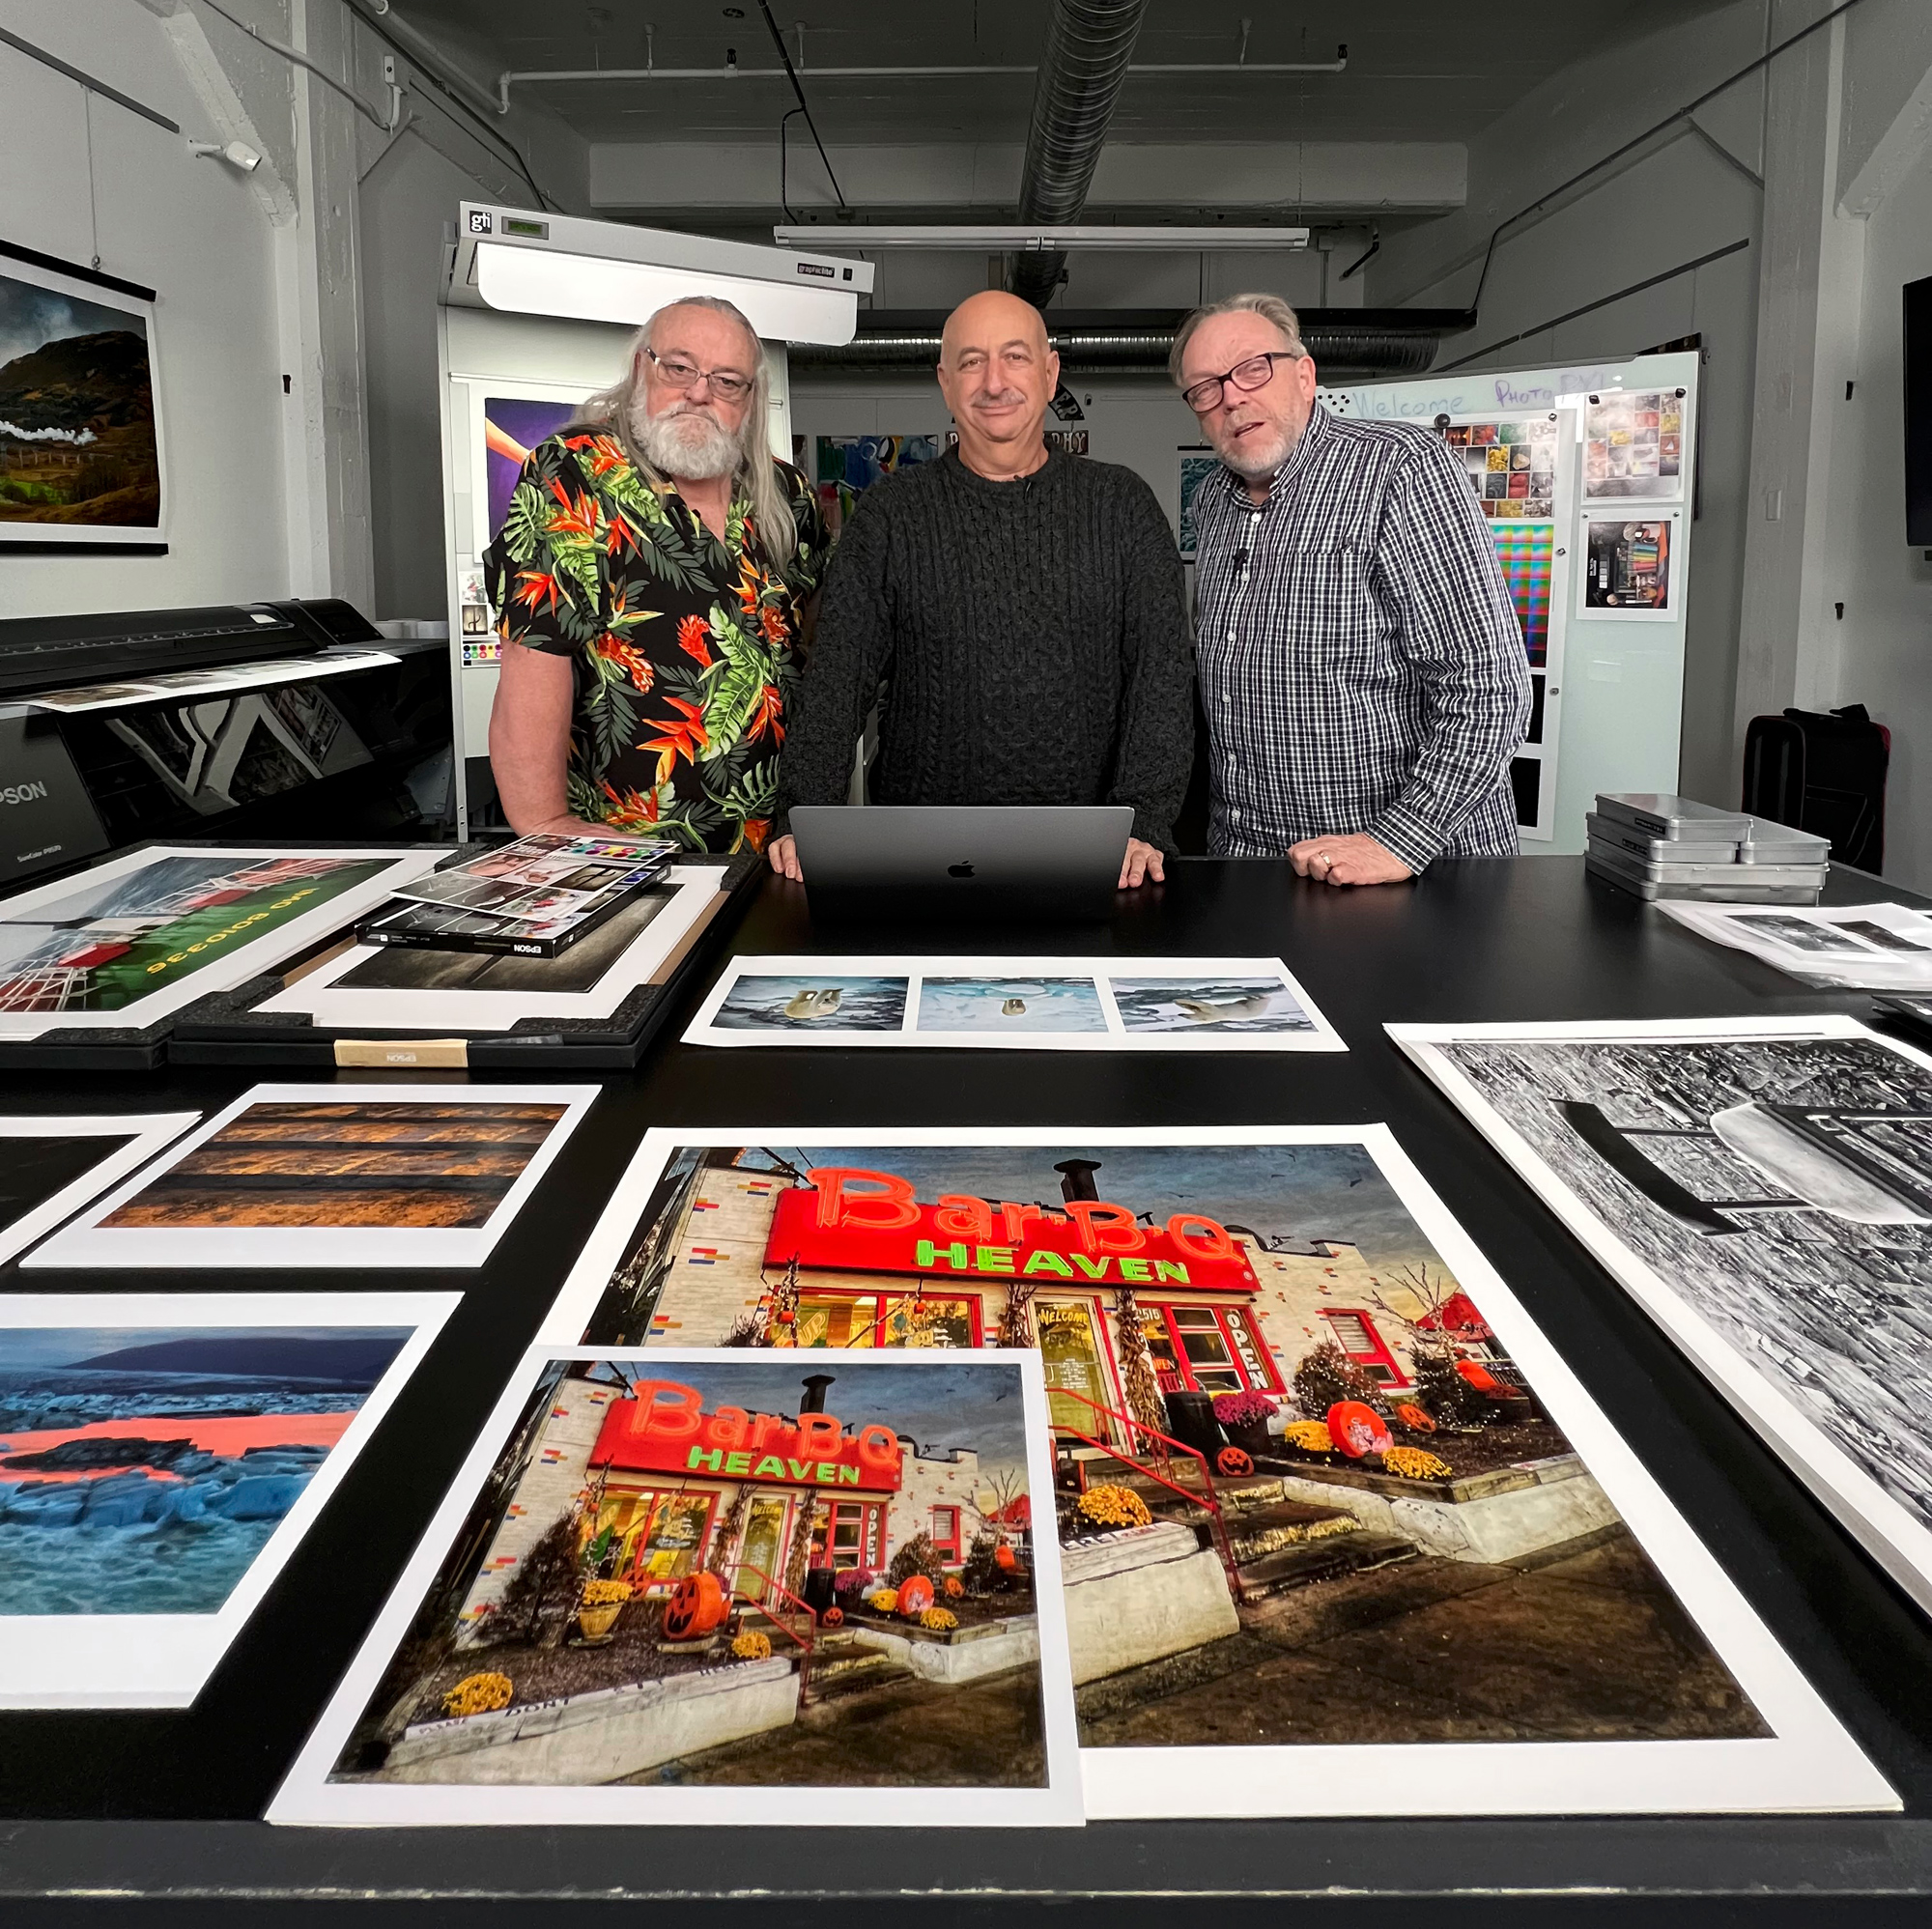 Jeff Schewe, Dan Steinhardt, and Kevin Raber in front of a table full of prints